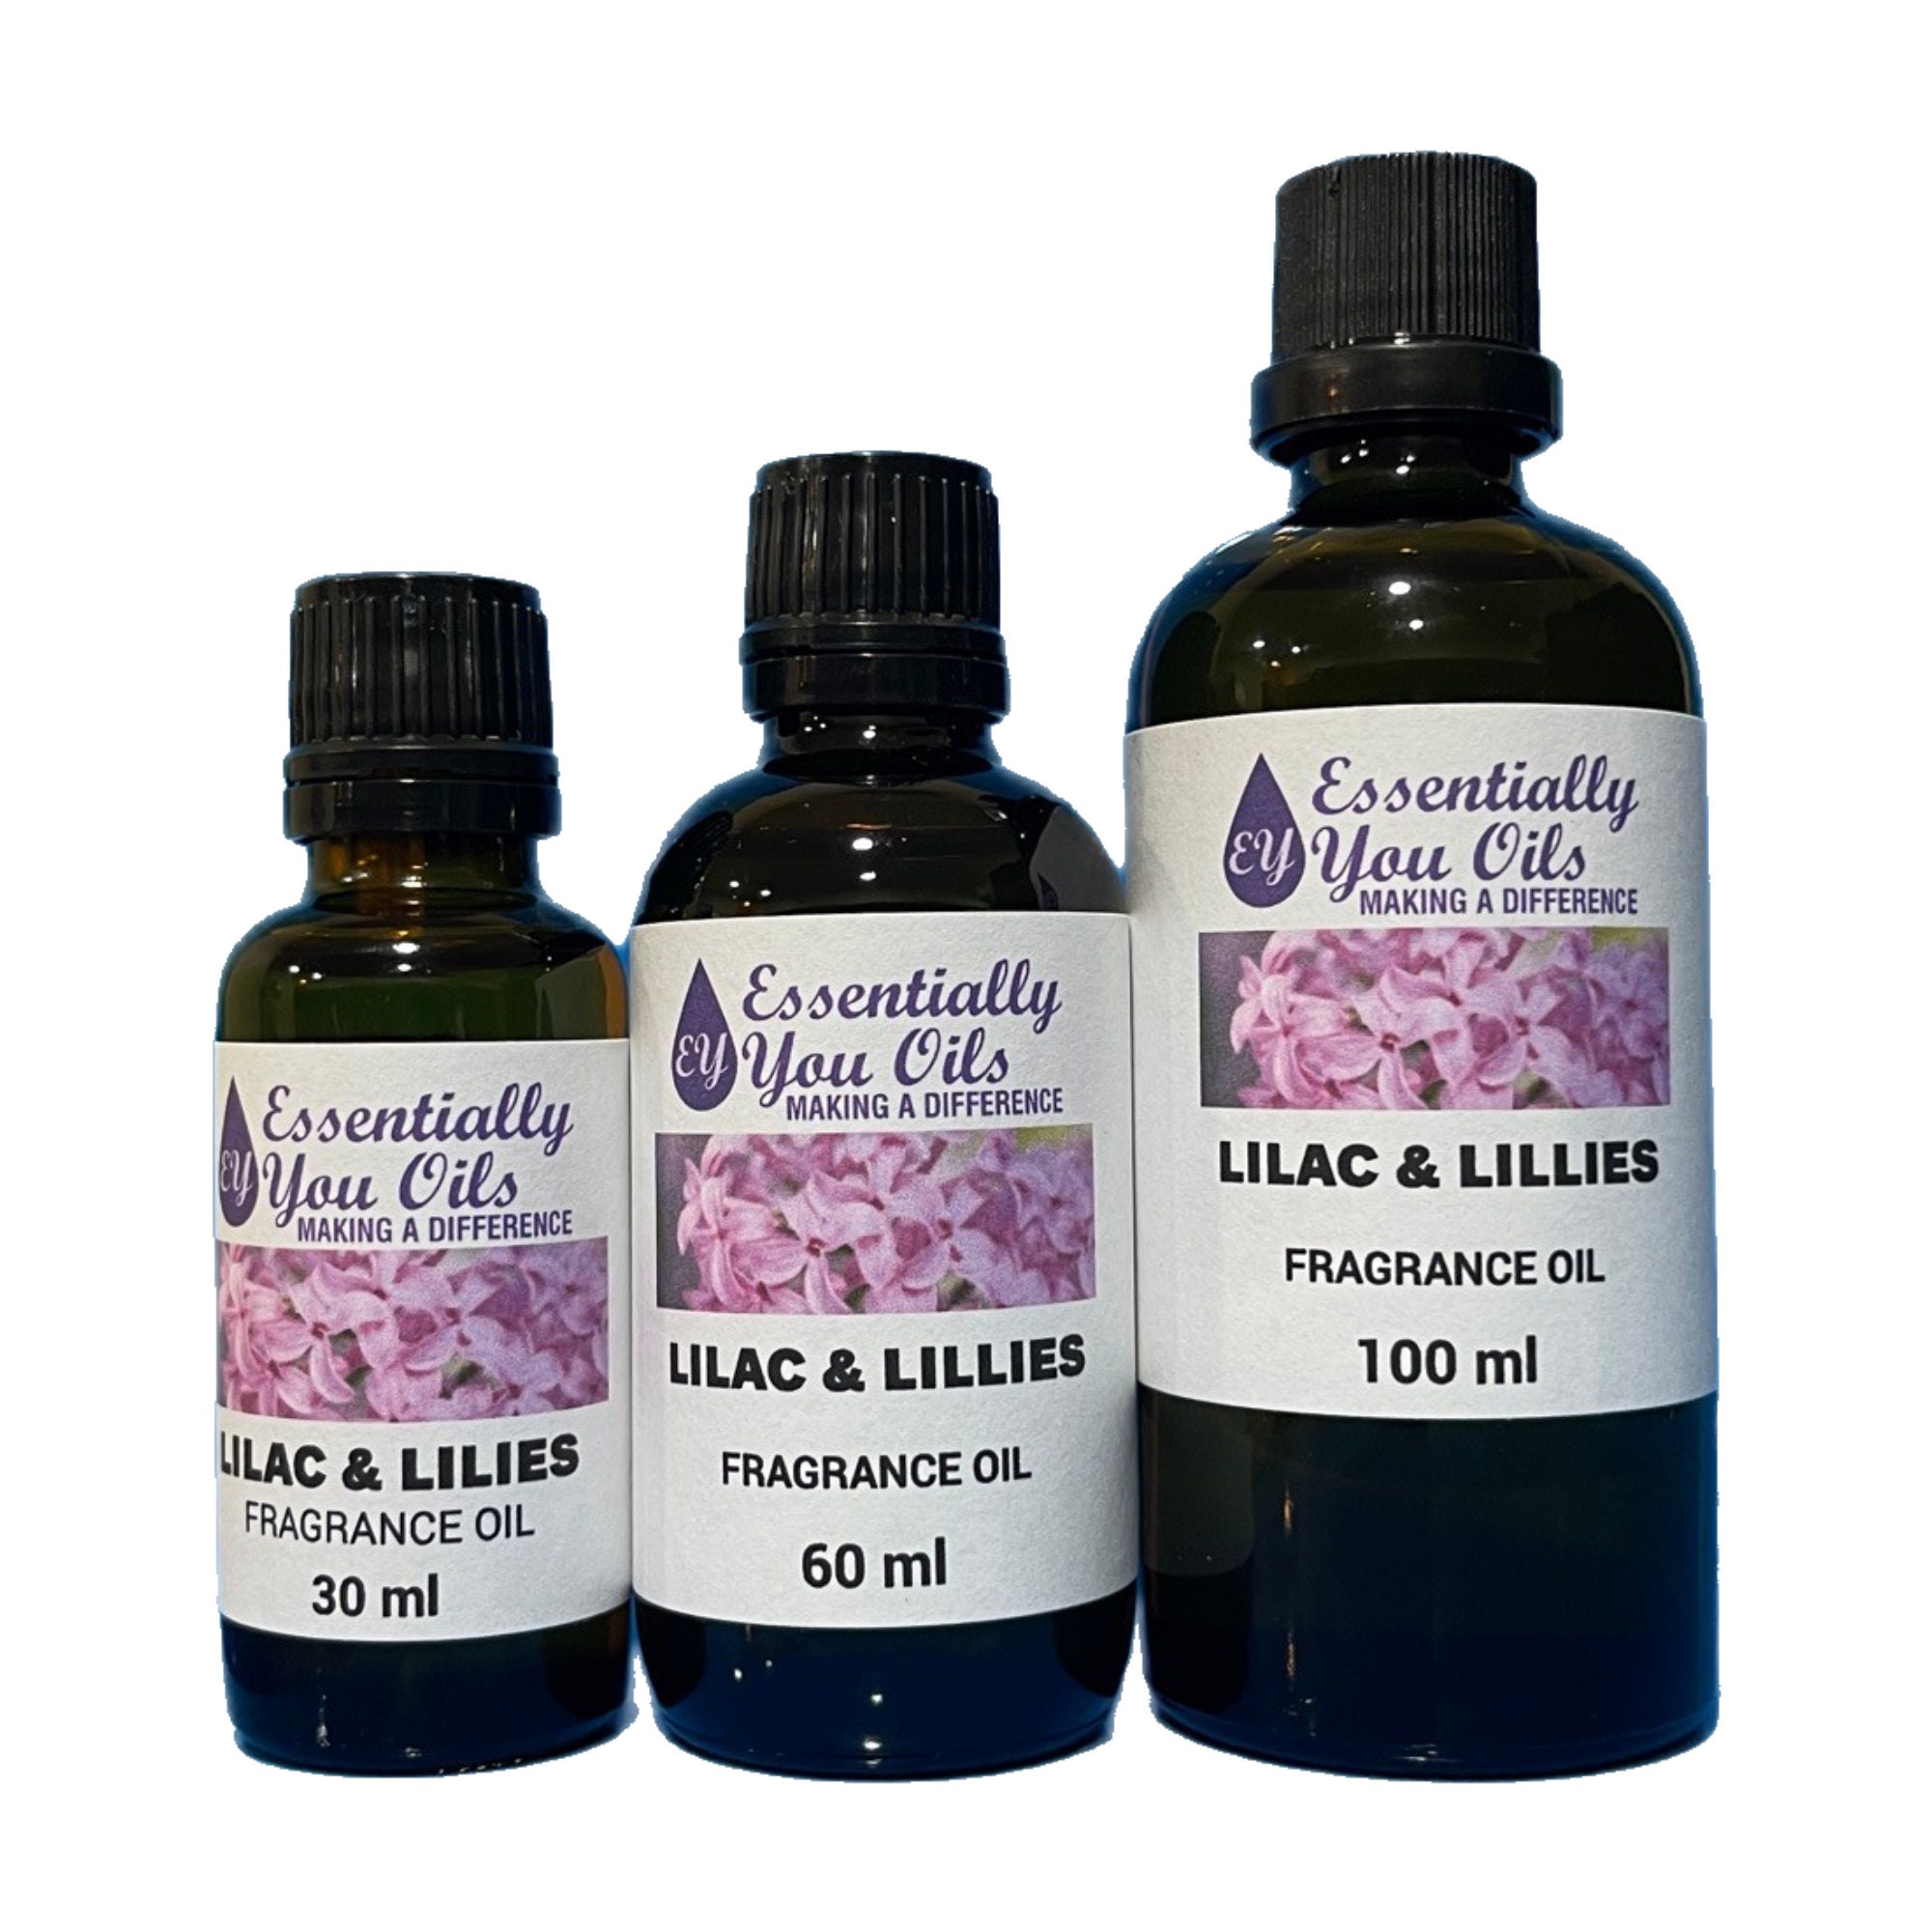 Lilac Enfleurage Perfume, Authentic Lilac Blossom Perfume Oil Made From  Organic Lilac Enfleurage, Limited Edition Tiny 1 Ml Sample Size. 